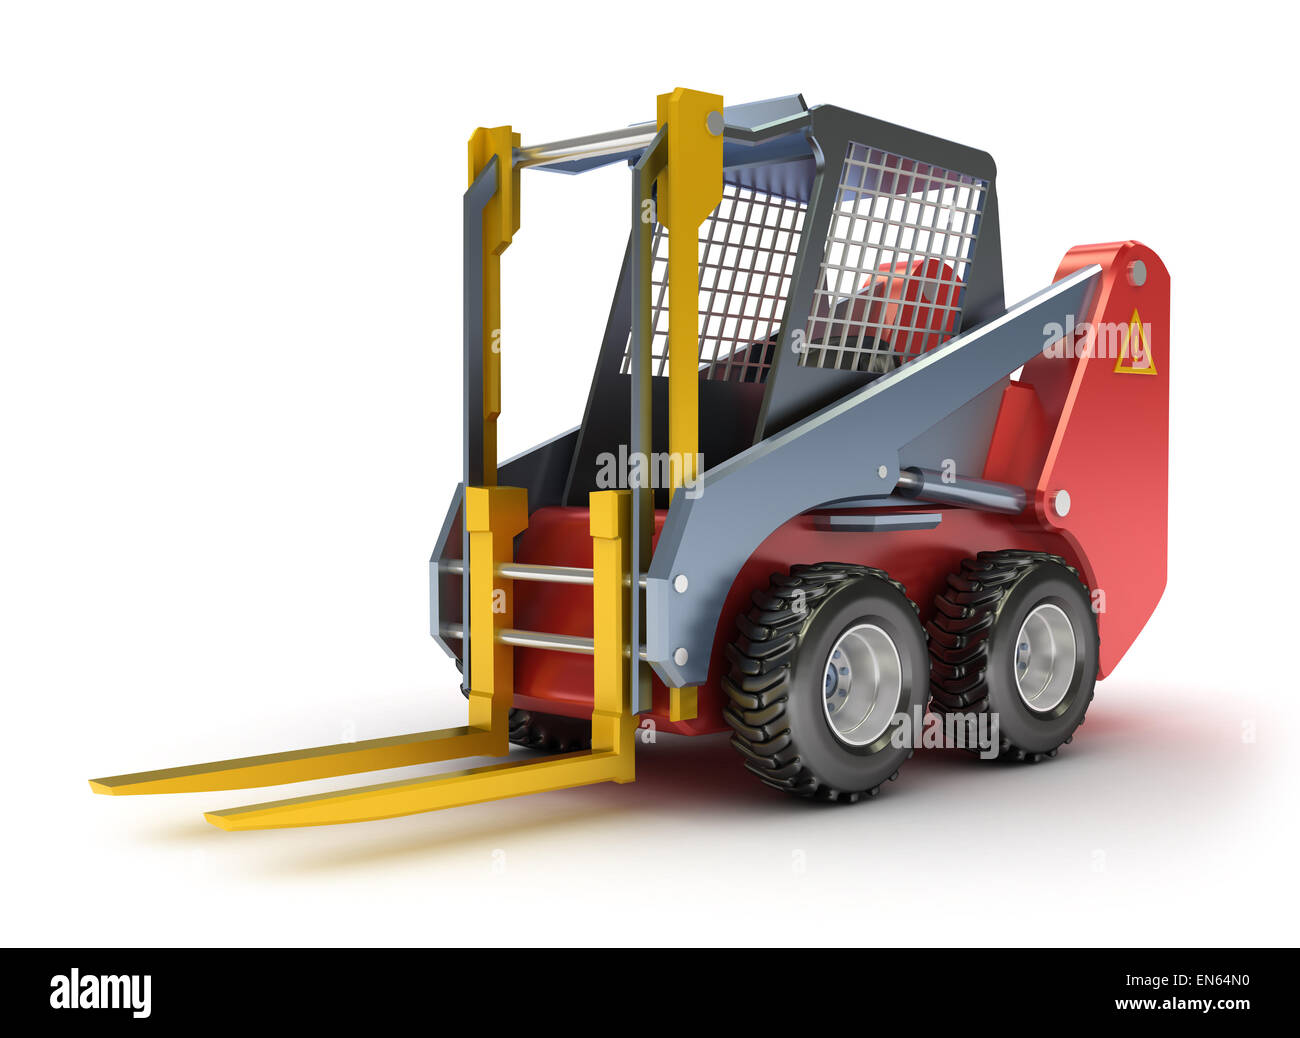 Forklift machine, isolated on white. 3D render. Stock Photo